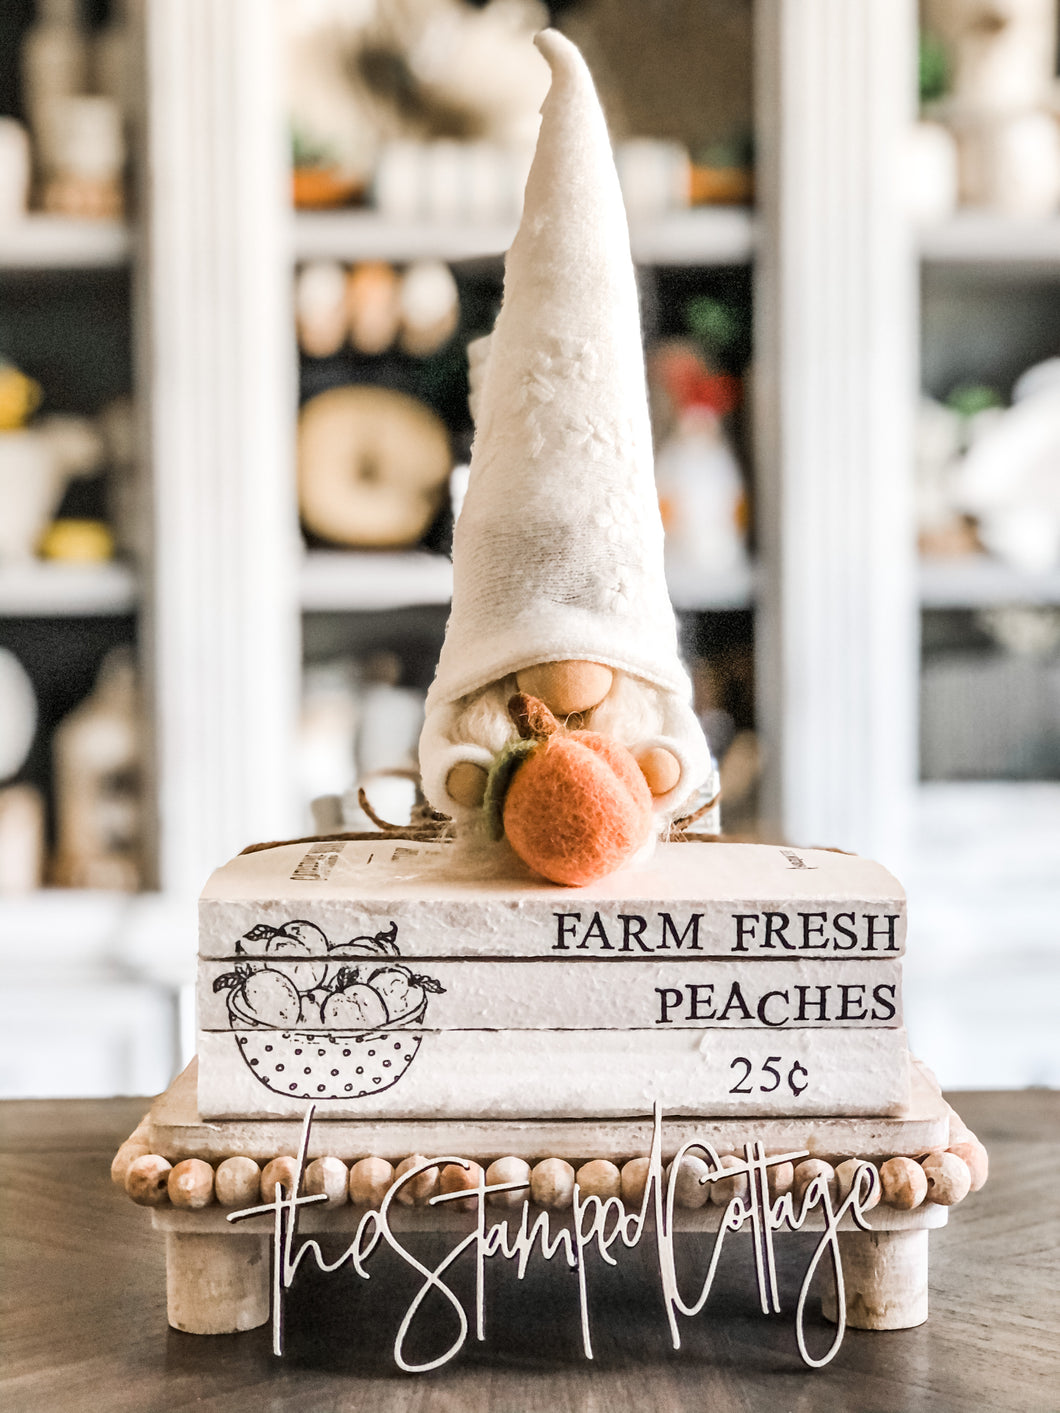 Stamped Book Stack - Farm Fresh Peaches 25 cents